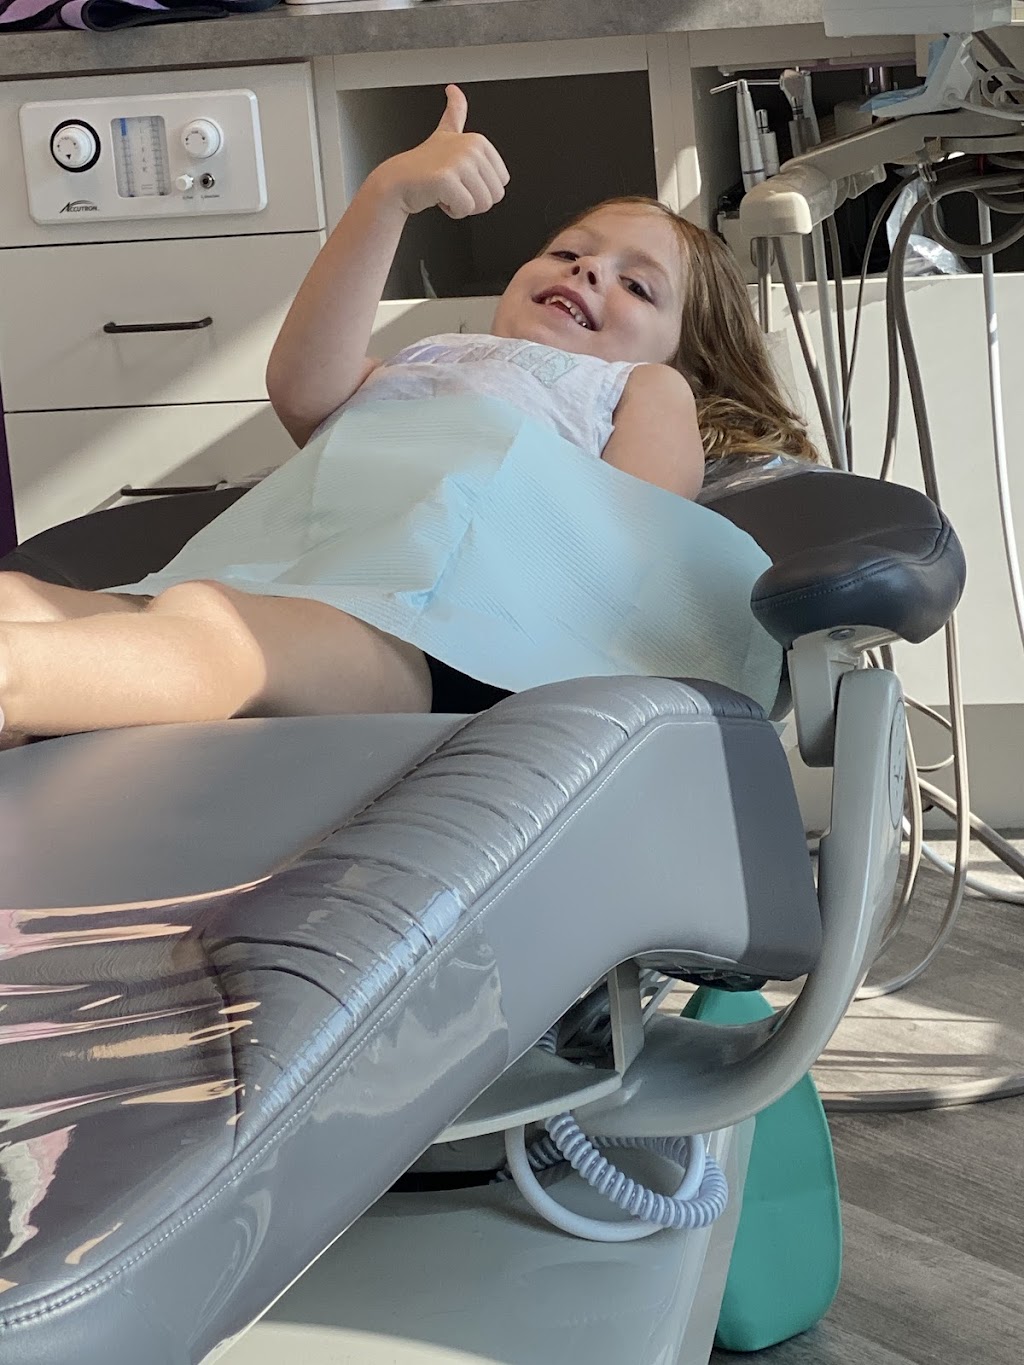 Saginaw Kids Dentistry | 600 E Bailey Boswell Rd Suite 100, Saginaw, TX 76131 | Phone: (682) 285-1900